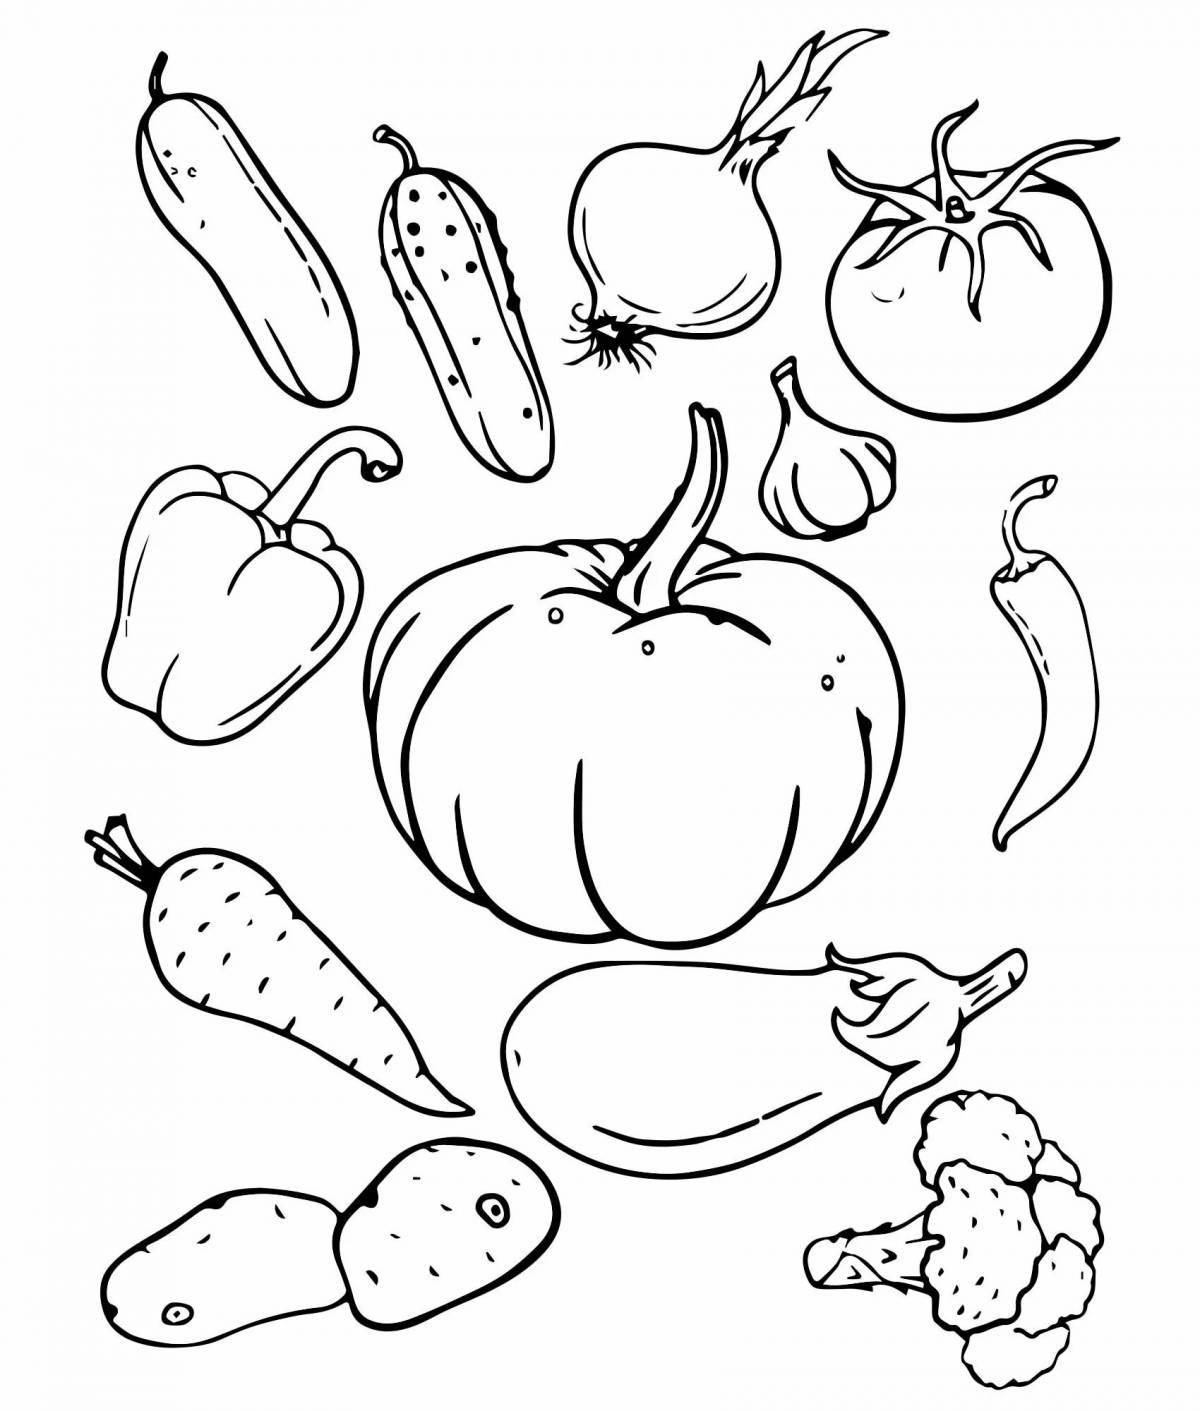 Cute fruits and vegetables coloring pages for kids